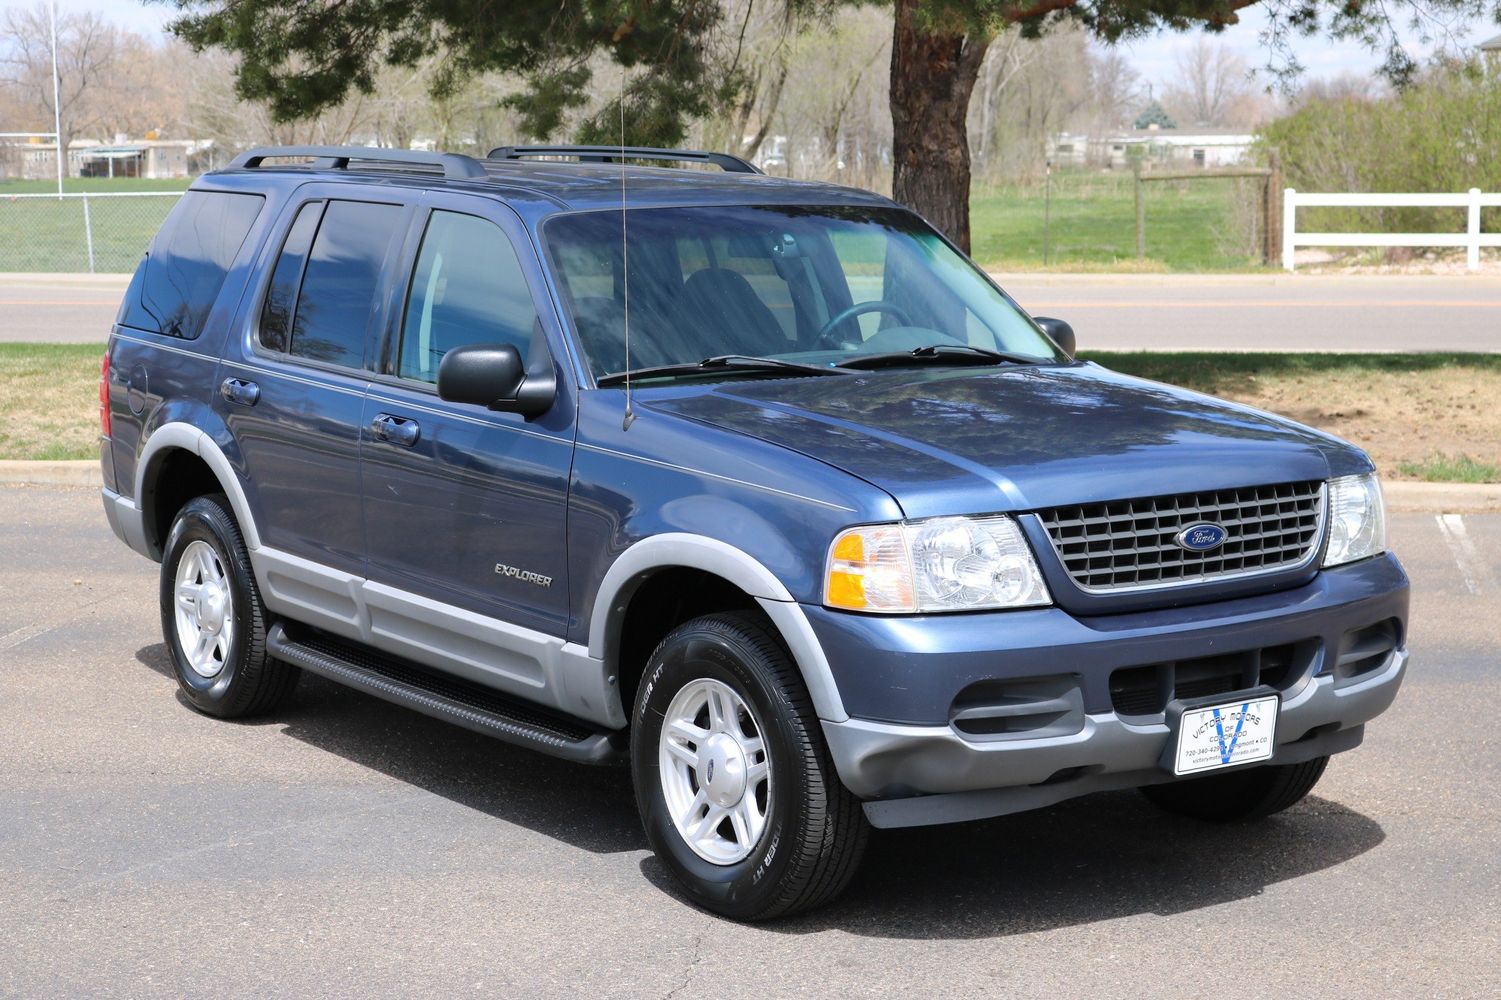 2002 Ford Explorer XLT | Victory Motors of Colorado 2002 Ford Explorer 4.0 Towing Capacity